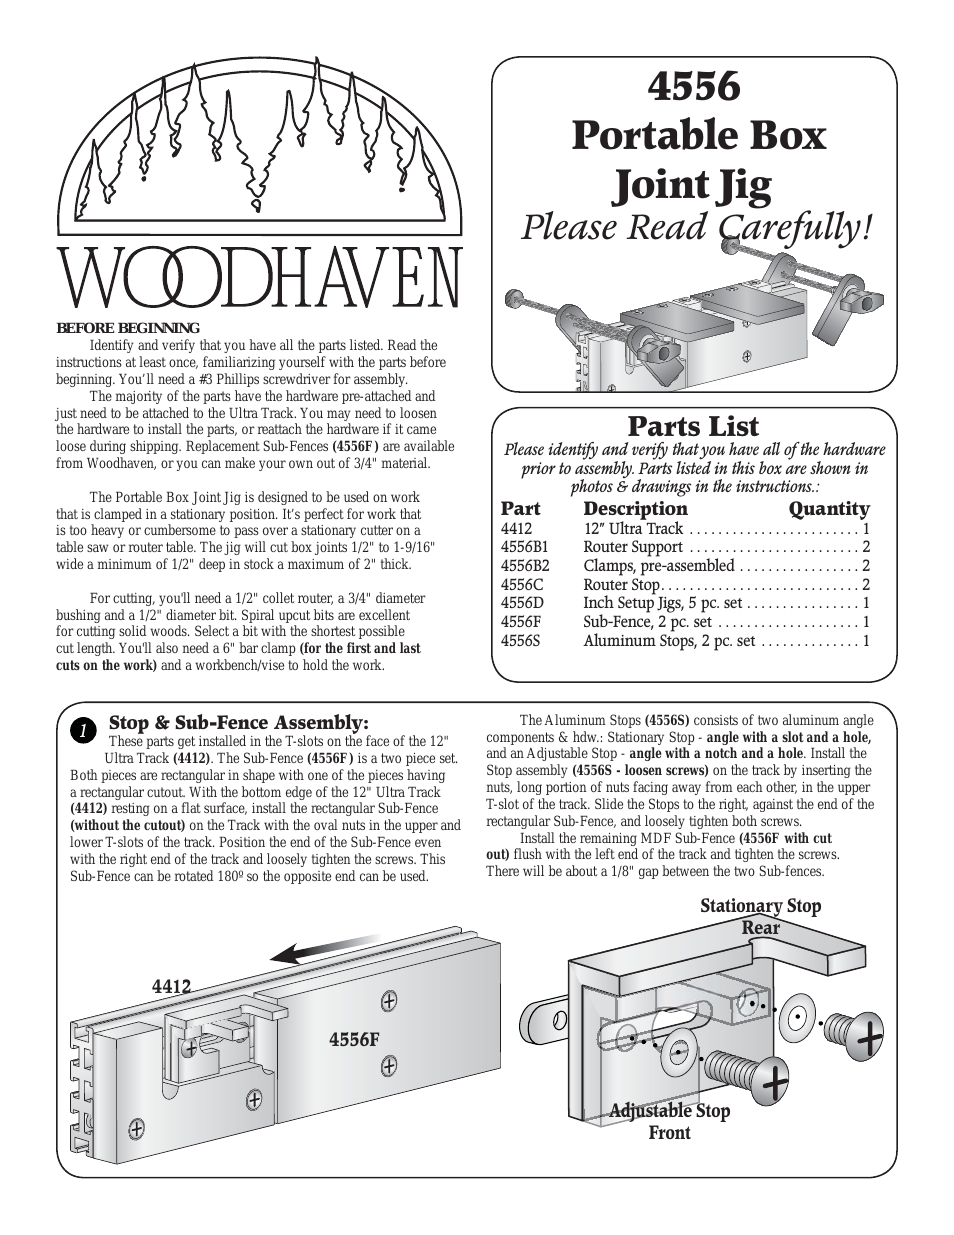 4556: Portable Box Joint Jig